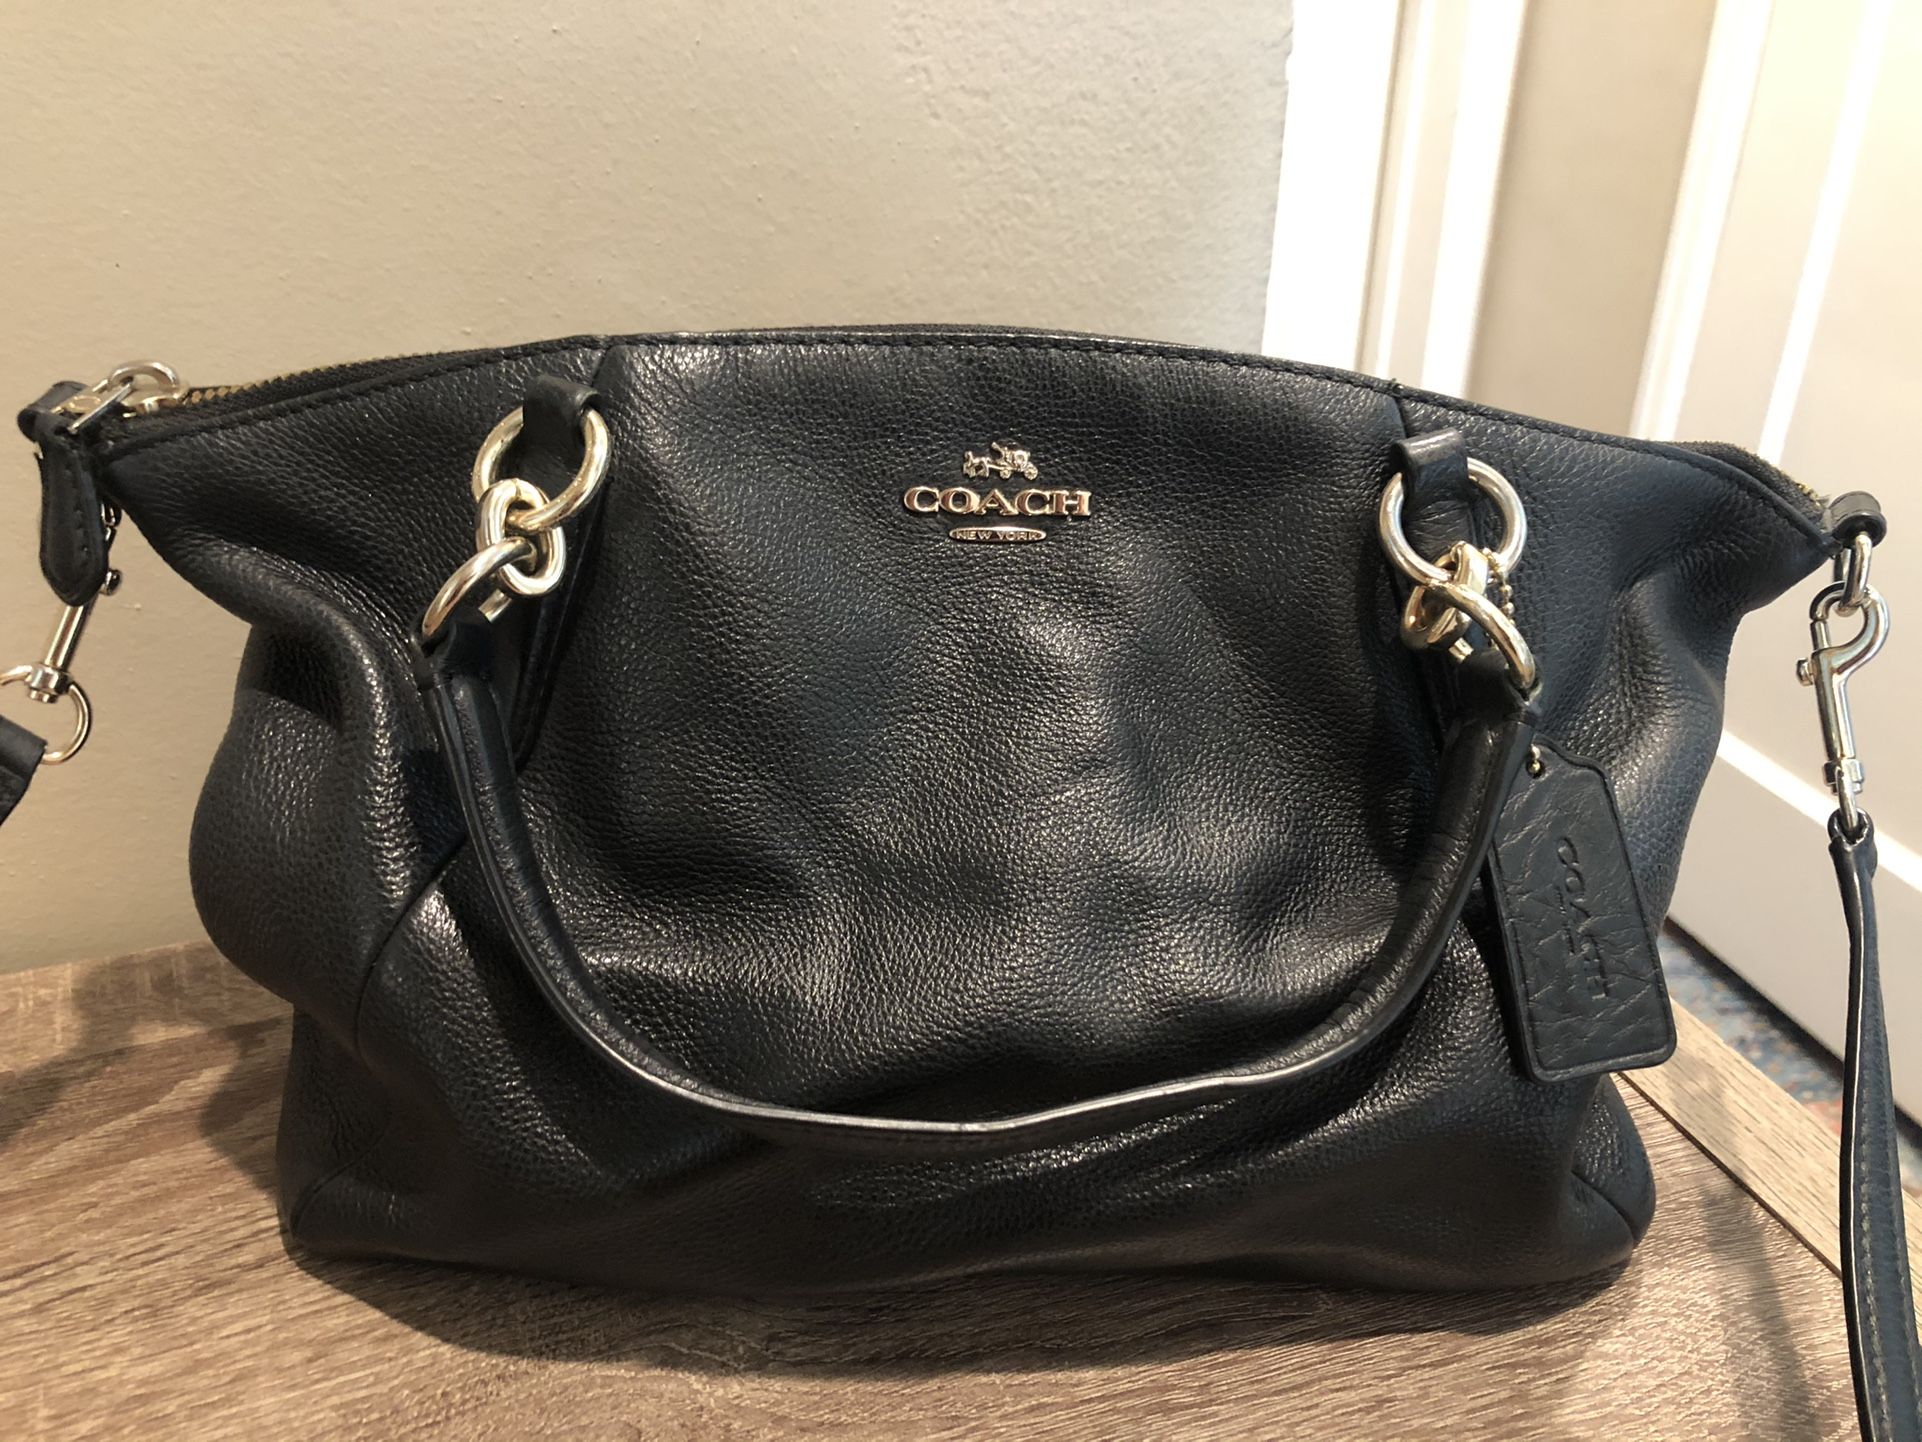 Authentic Coach Purse - Like New